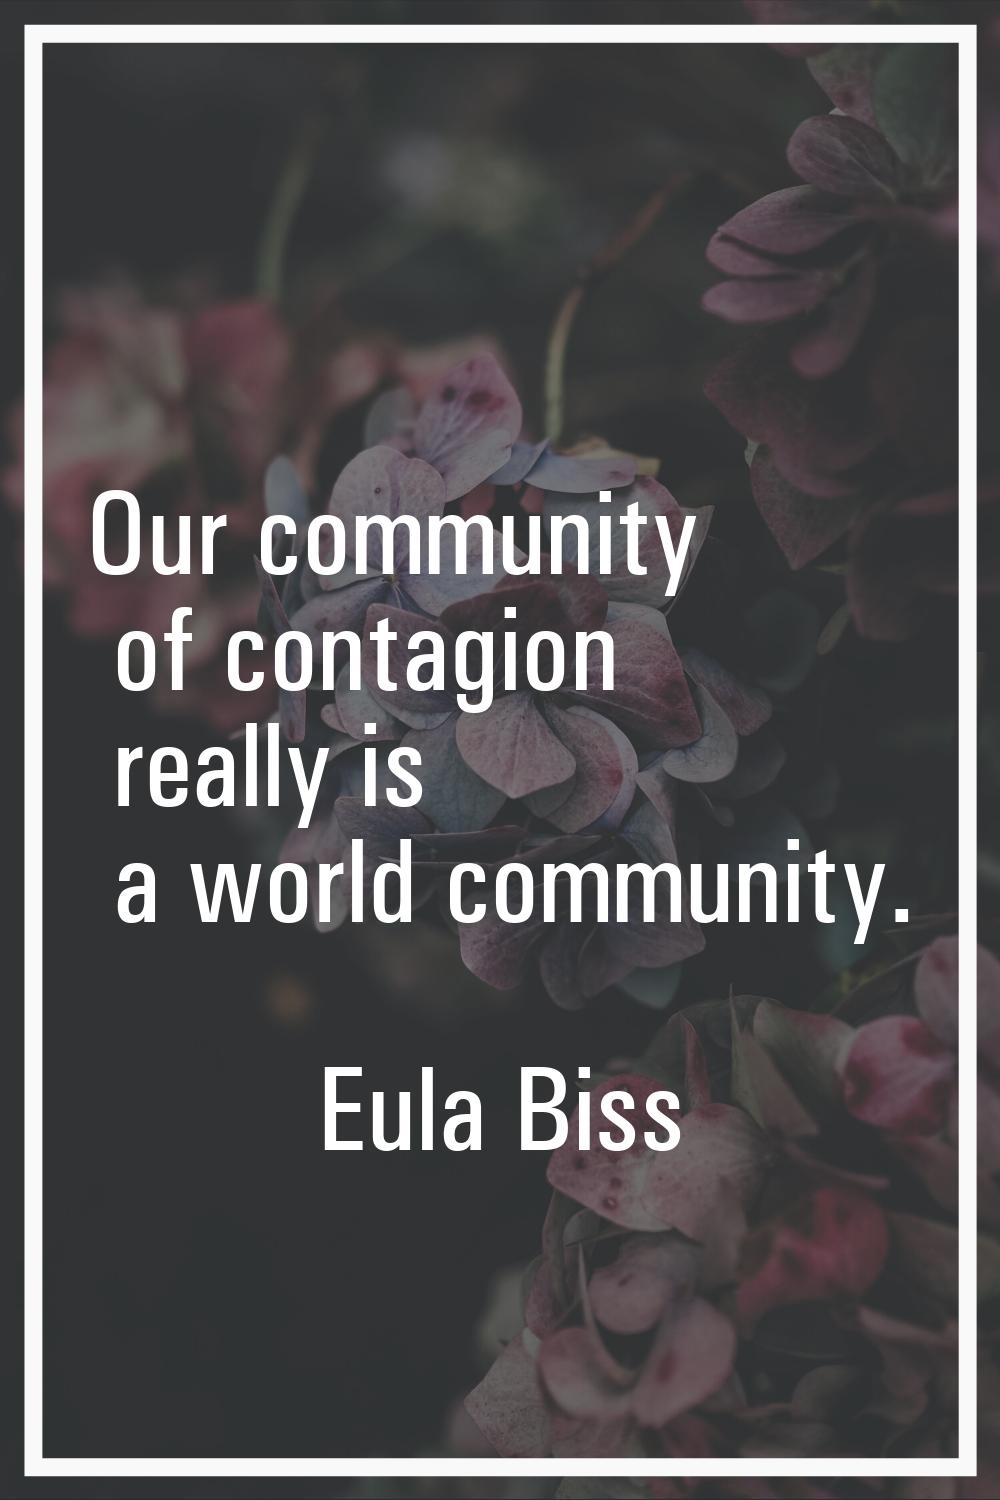 Our community of contagion really is a world community.